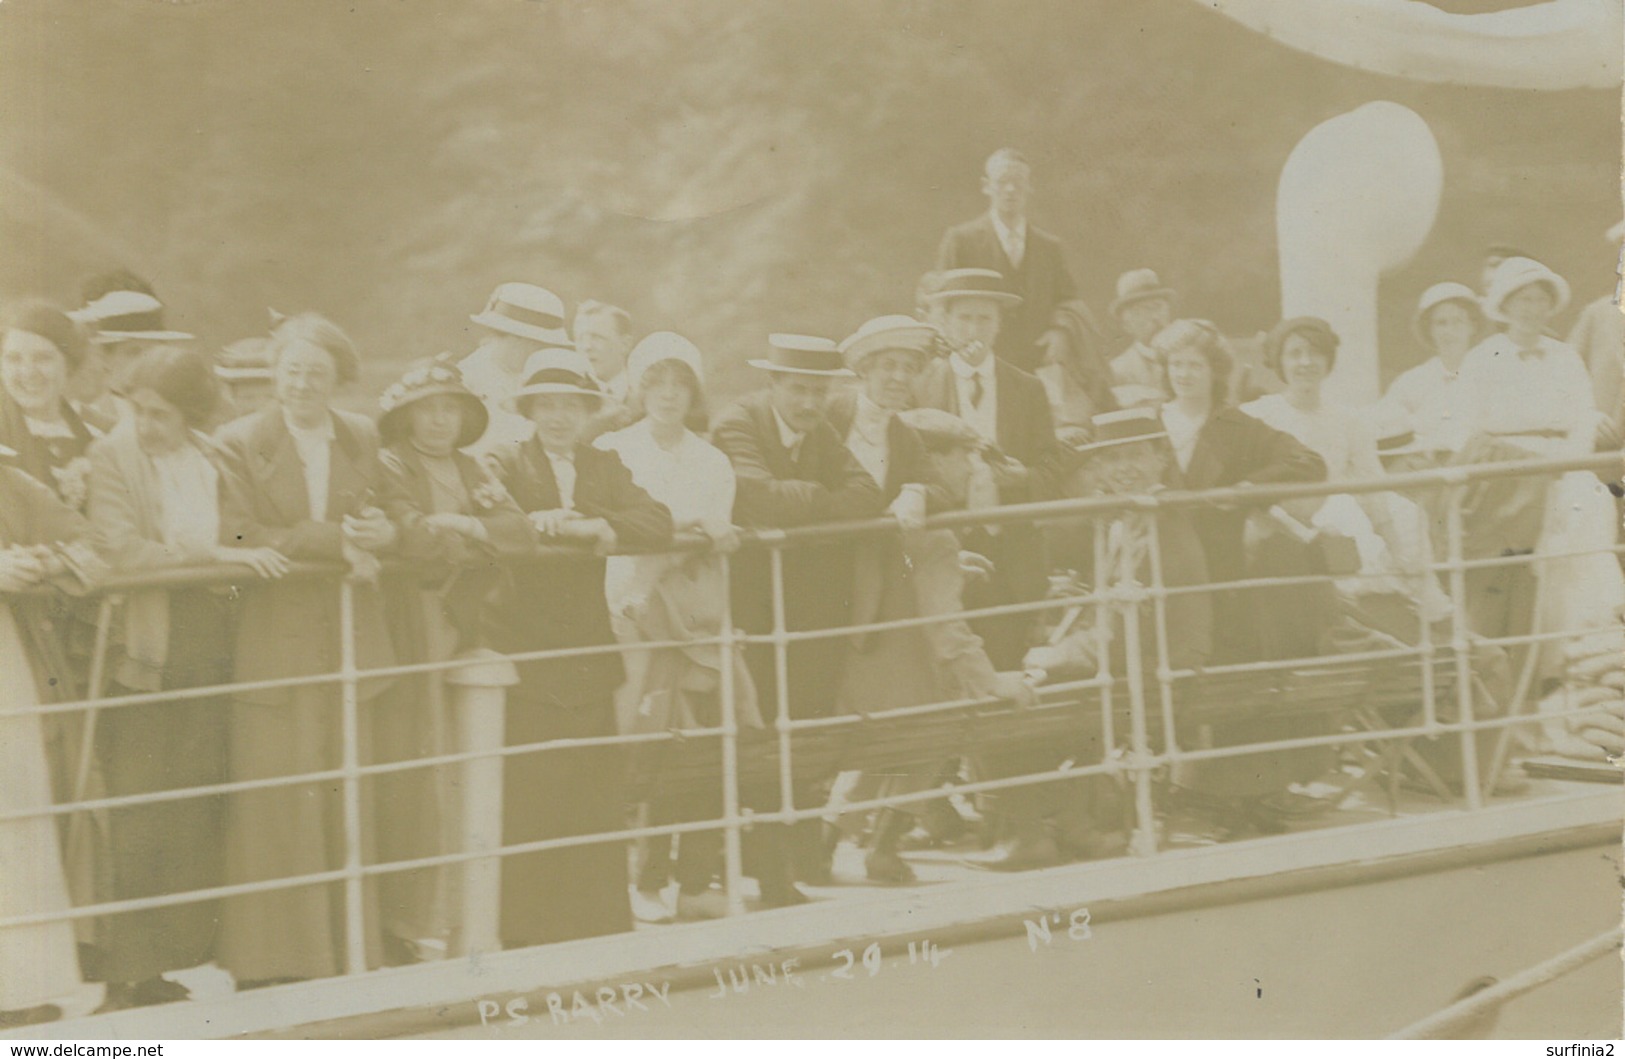 DEVON - ILFRACOMBE - PADDLE STEAMER "BARRY" WITH TRIPPERS RP  Dv228 - Ilfracombe